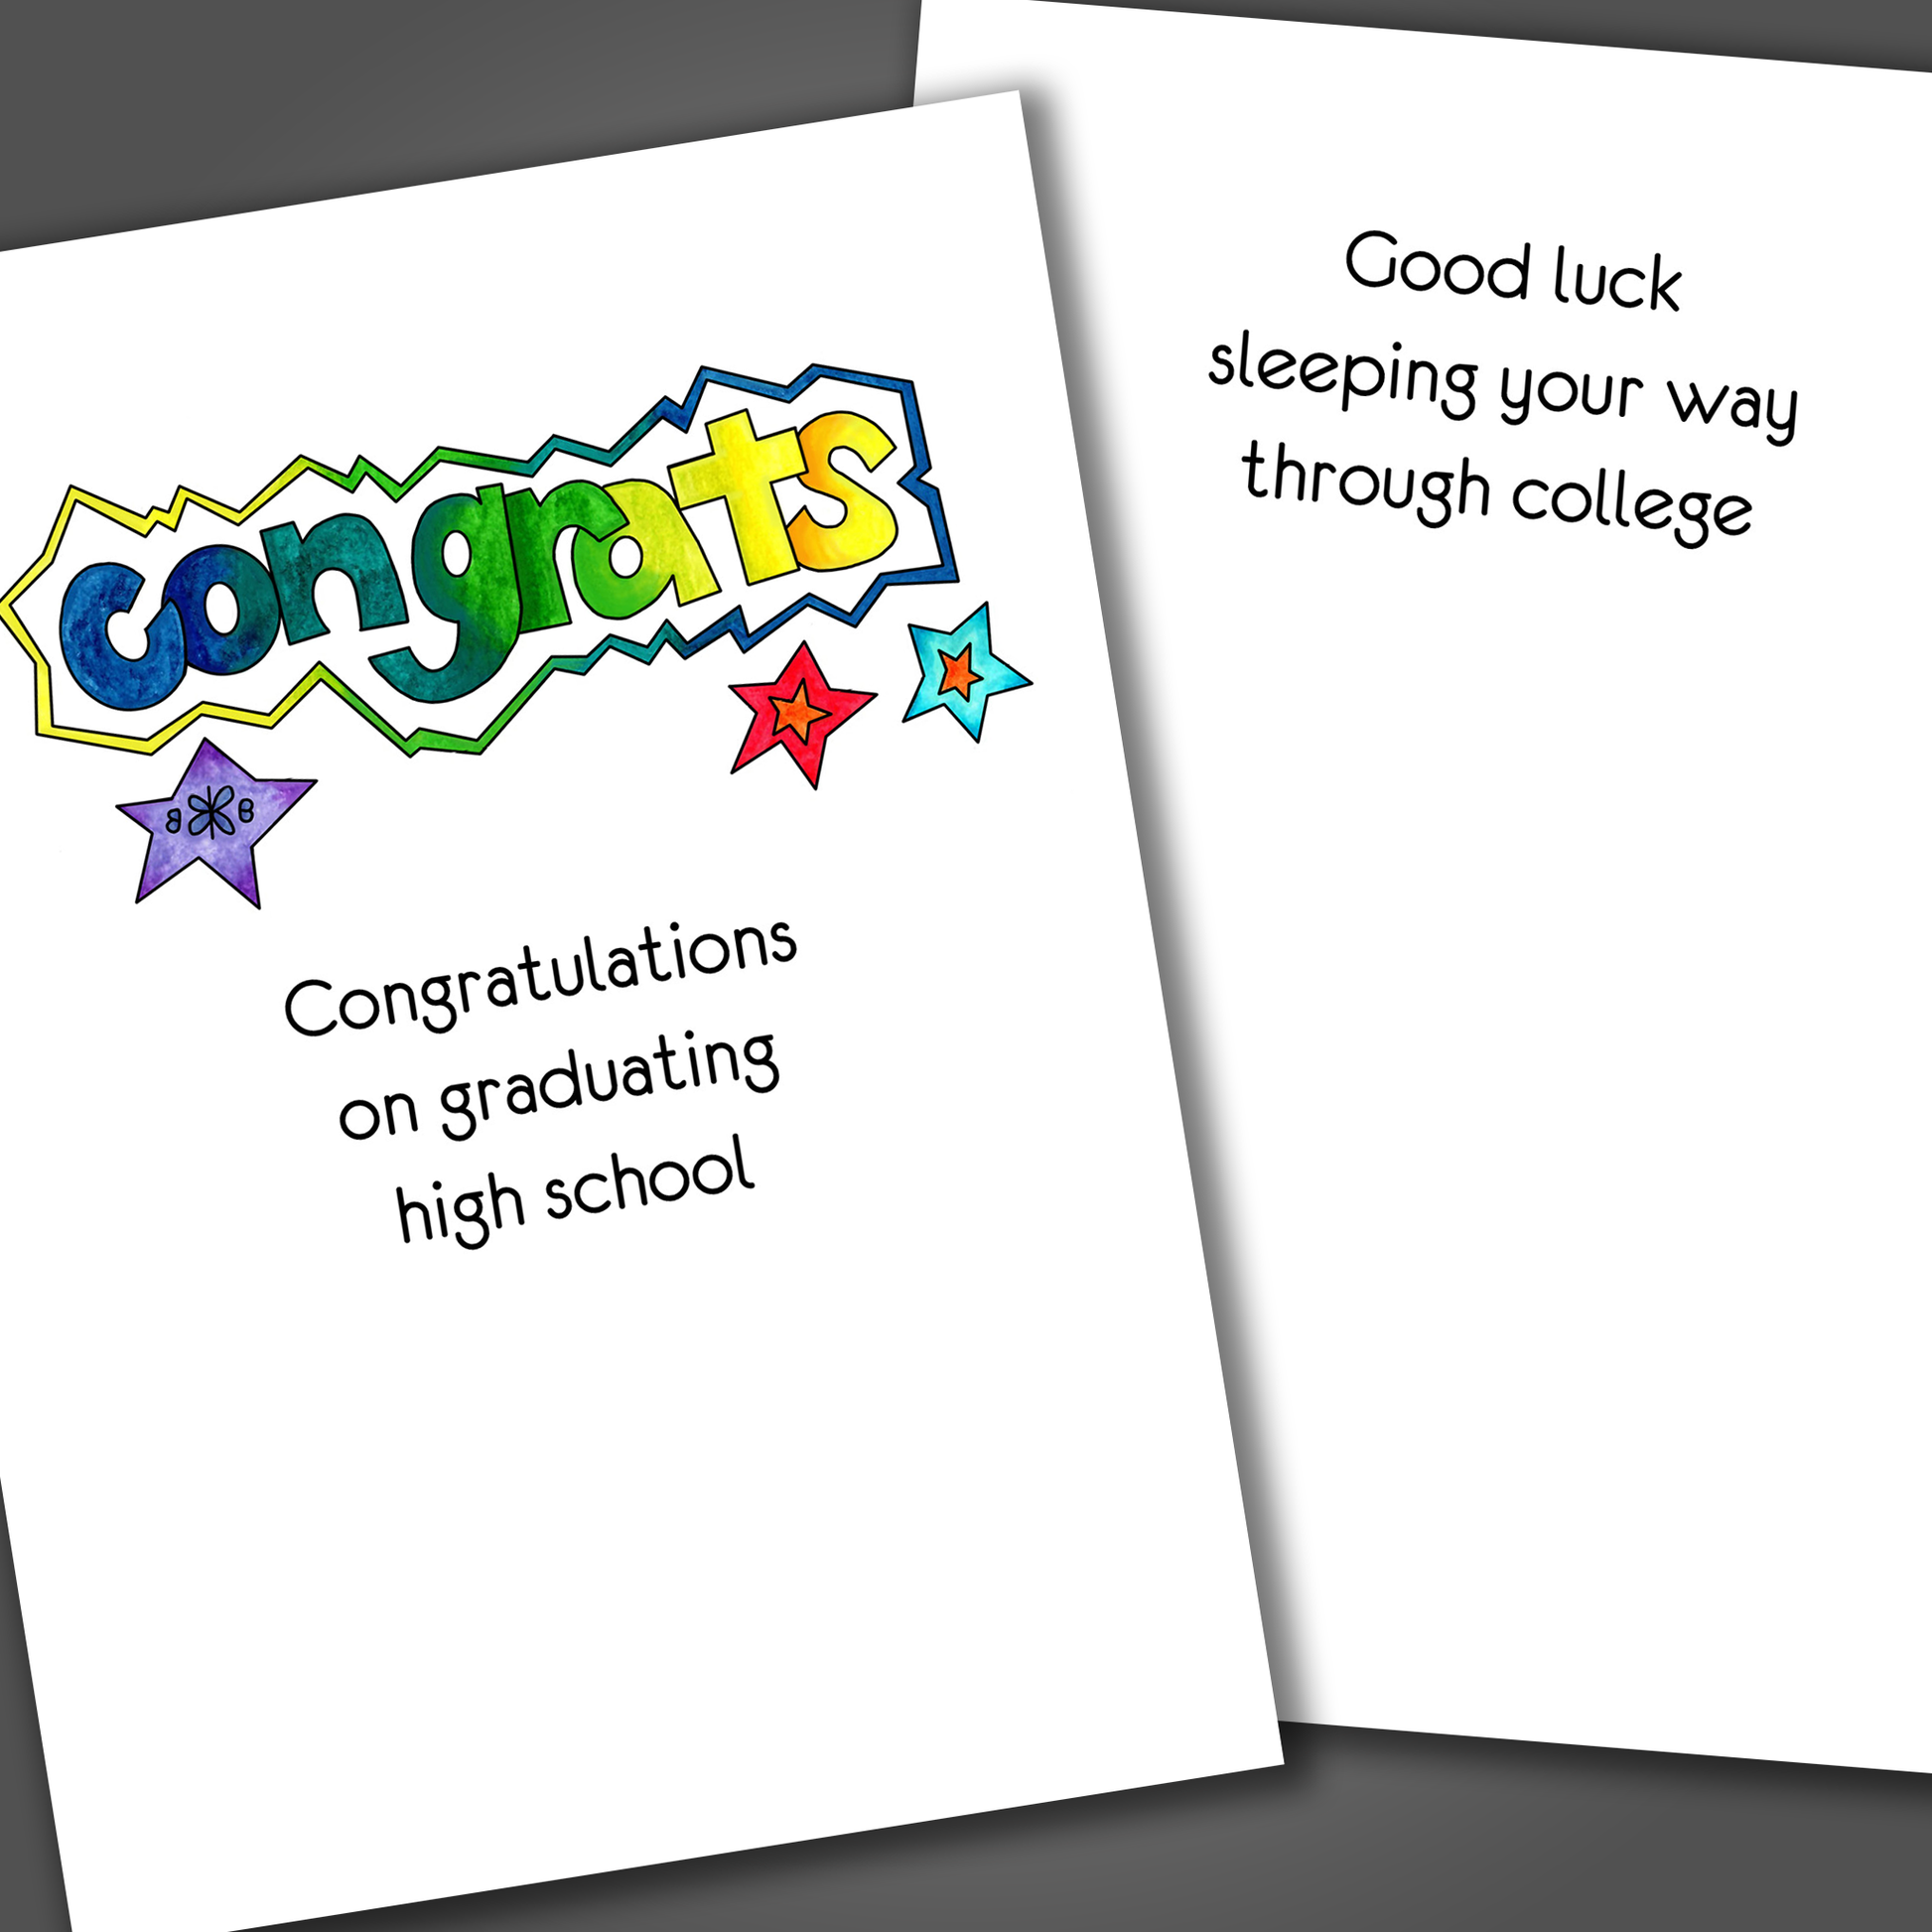 Funny high school congratulations card with the word congrats drawn on the front of the card. Inside the card is a funny joke that says good luck sleeping your way through college.